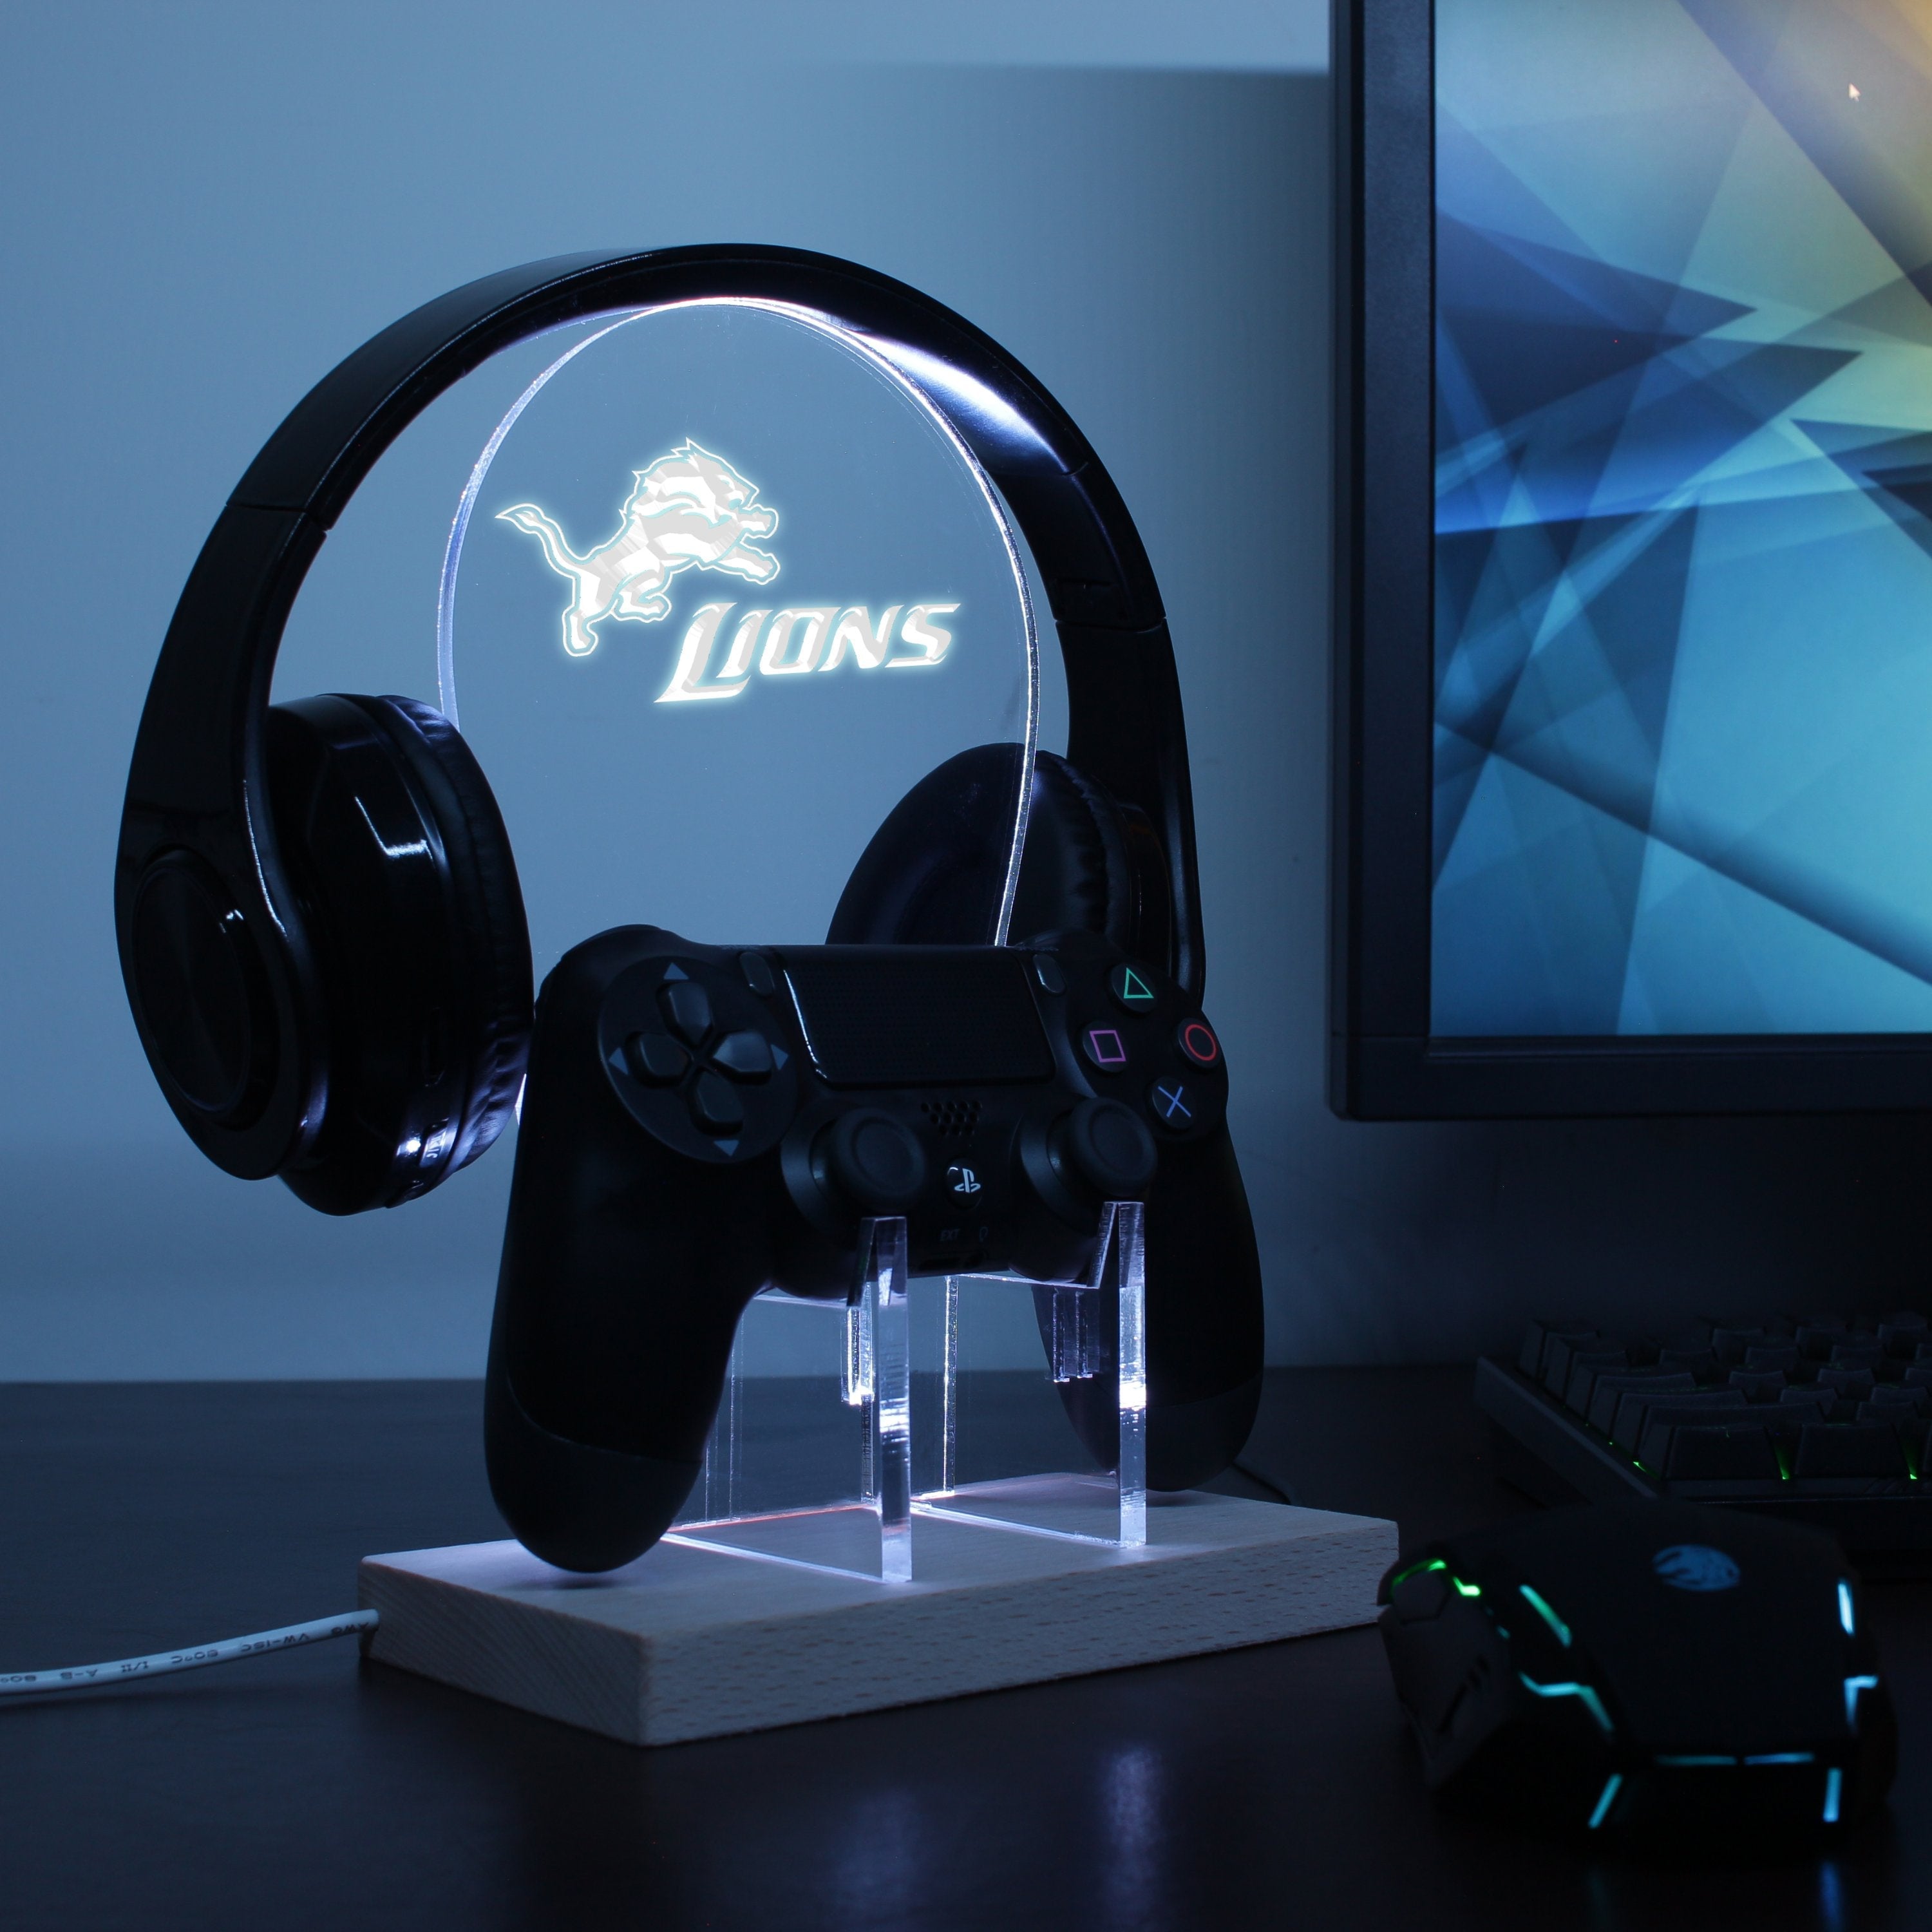 Cambridge Lions LED Gaming Headset Controller Stand